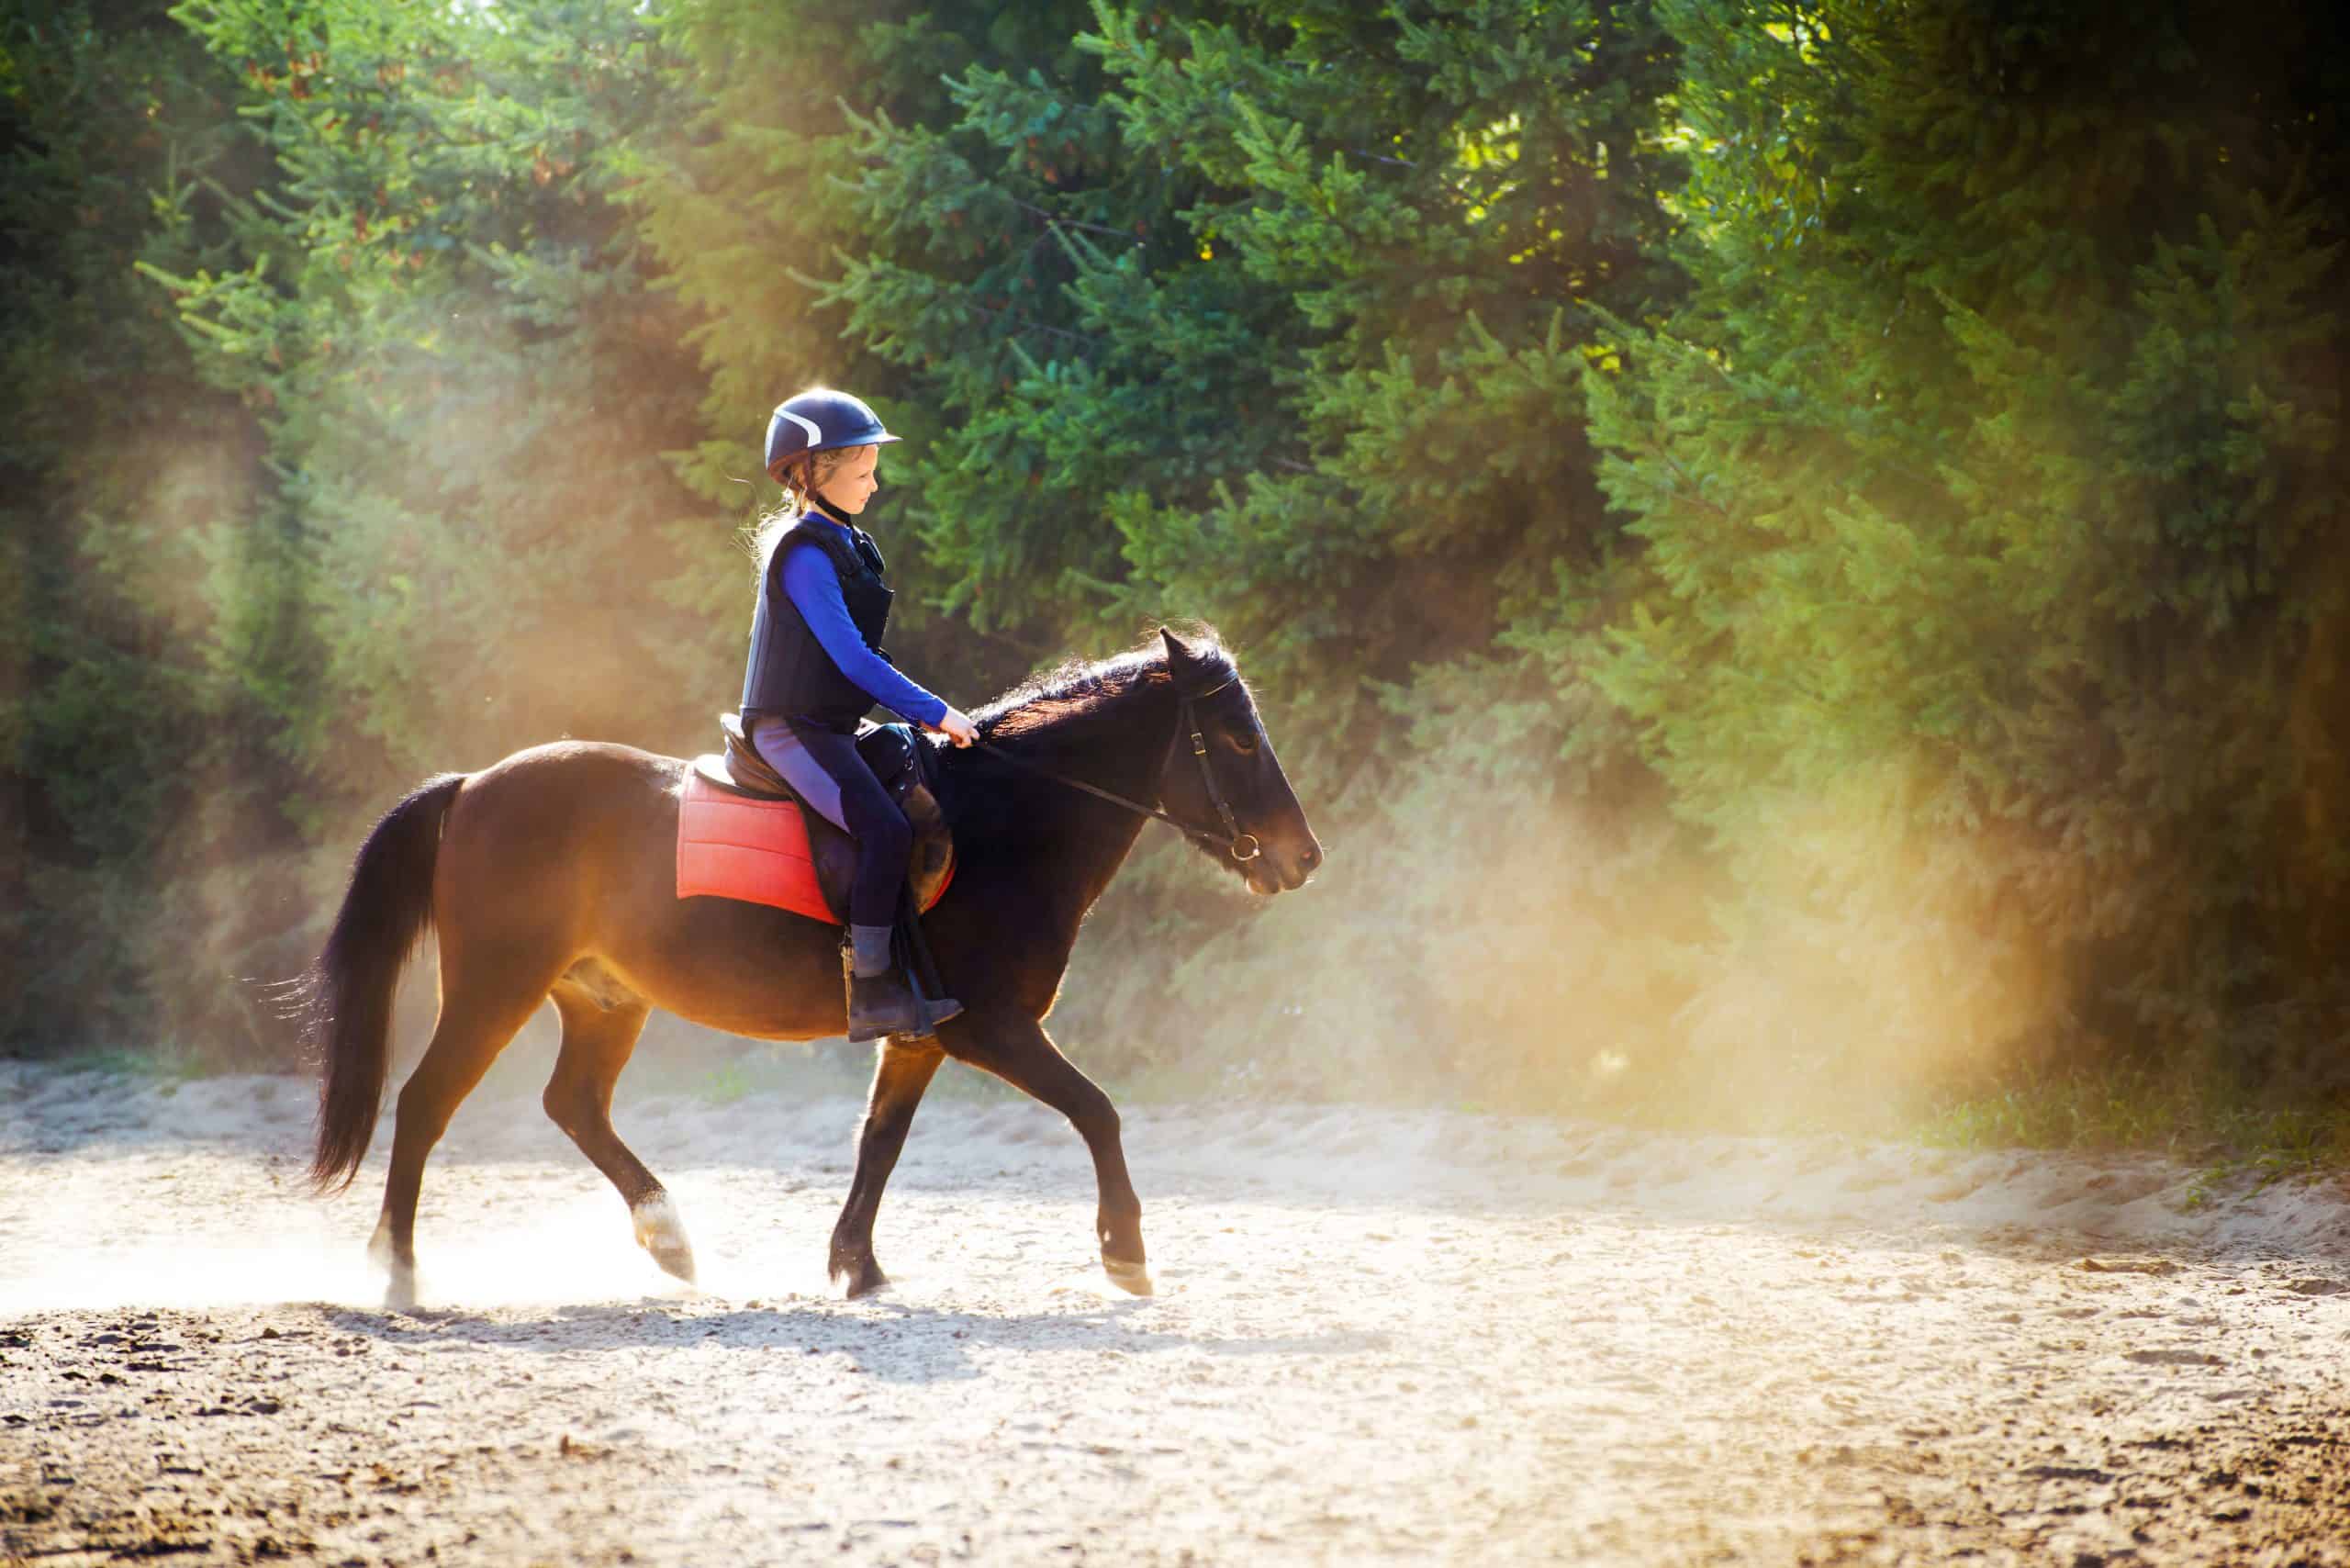 A young girl riding her pony during riding lesson, outside. Natural sun rays shining in dust during sunset.